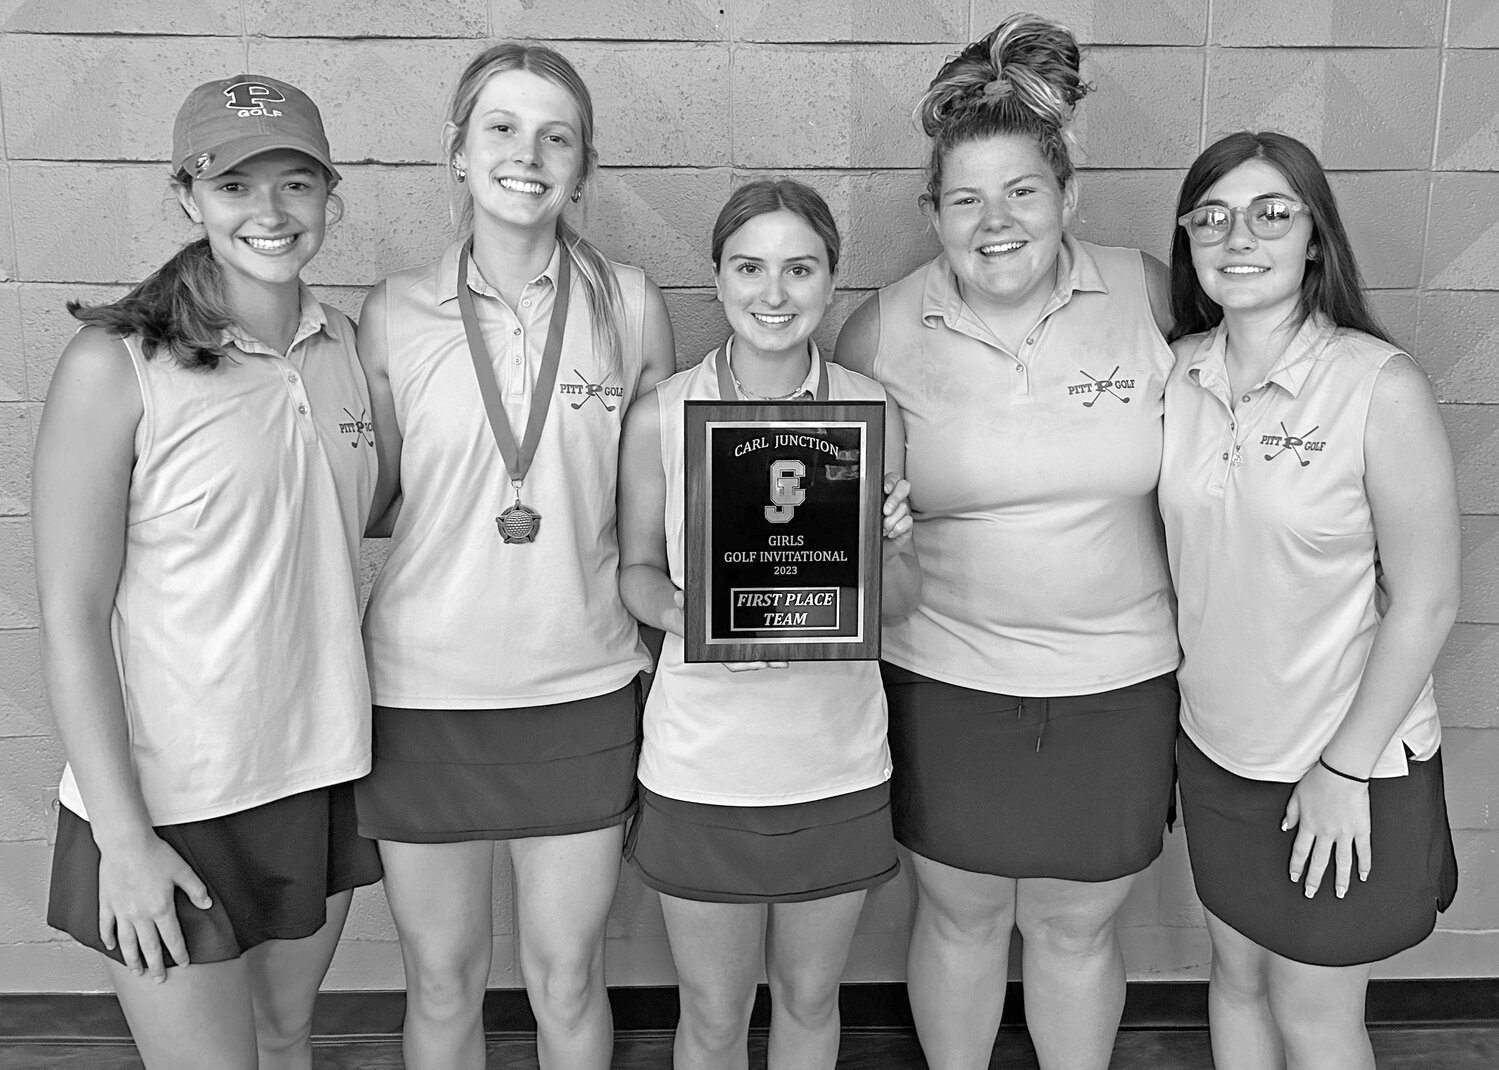 The Pittsburg girls golf squad shot a 398 to win top team honors Monday in the Carl Junction Invitational at Briarbrook Country Club. Jacqueline Hall shot 95 overall, 47 on the front and 48 on the back-9, and finished third place. Alyssa Cosens shot 96 (47/49) and placed fourth. Macy Farrington’s 103 and Ava Steier’s 104 rounded out the Dragons’ 398 team score. Pittsburg returns to the course Wednesday for the Parsons tournament at the Katy Golf Course.